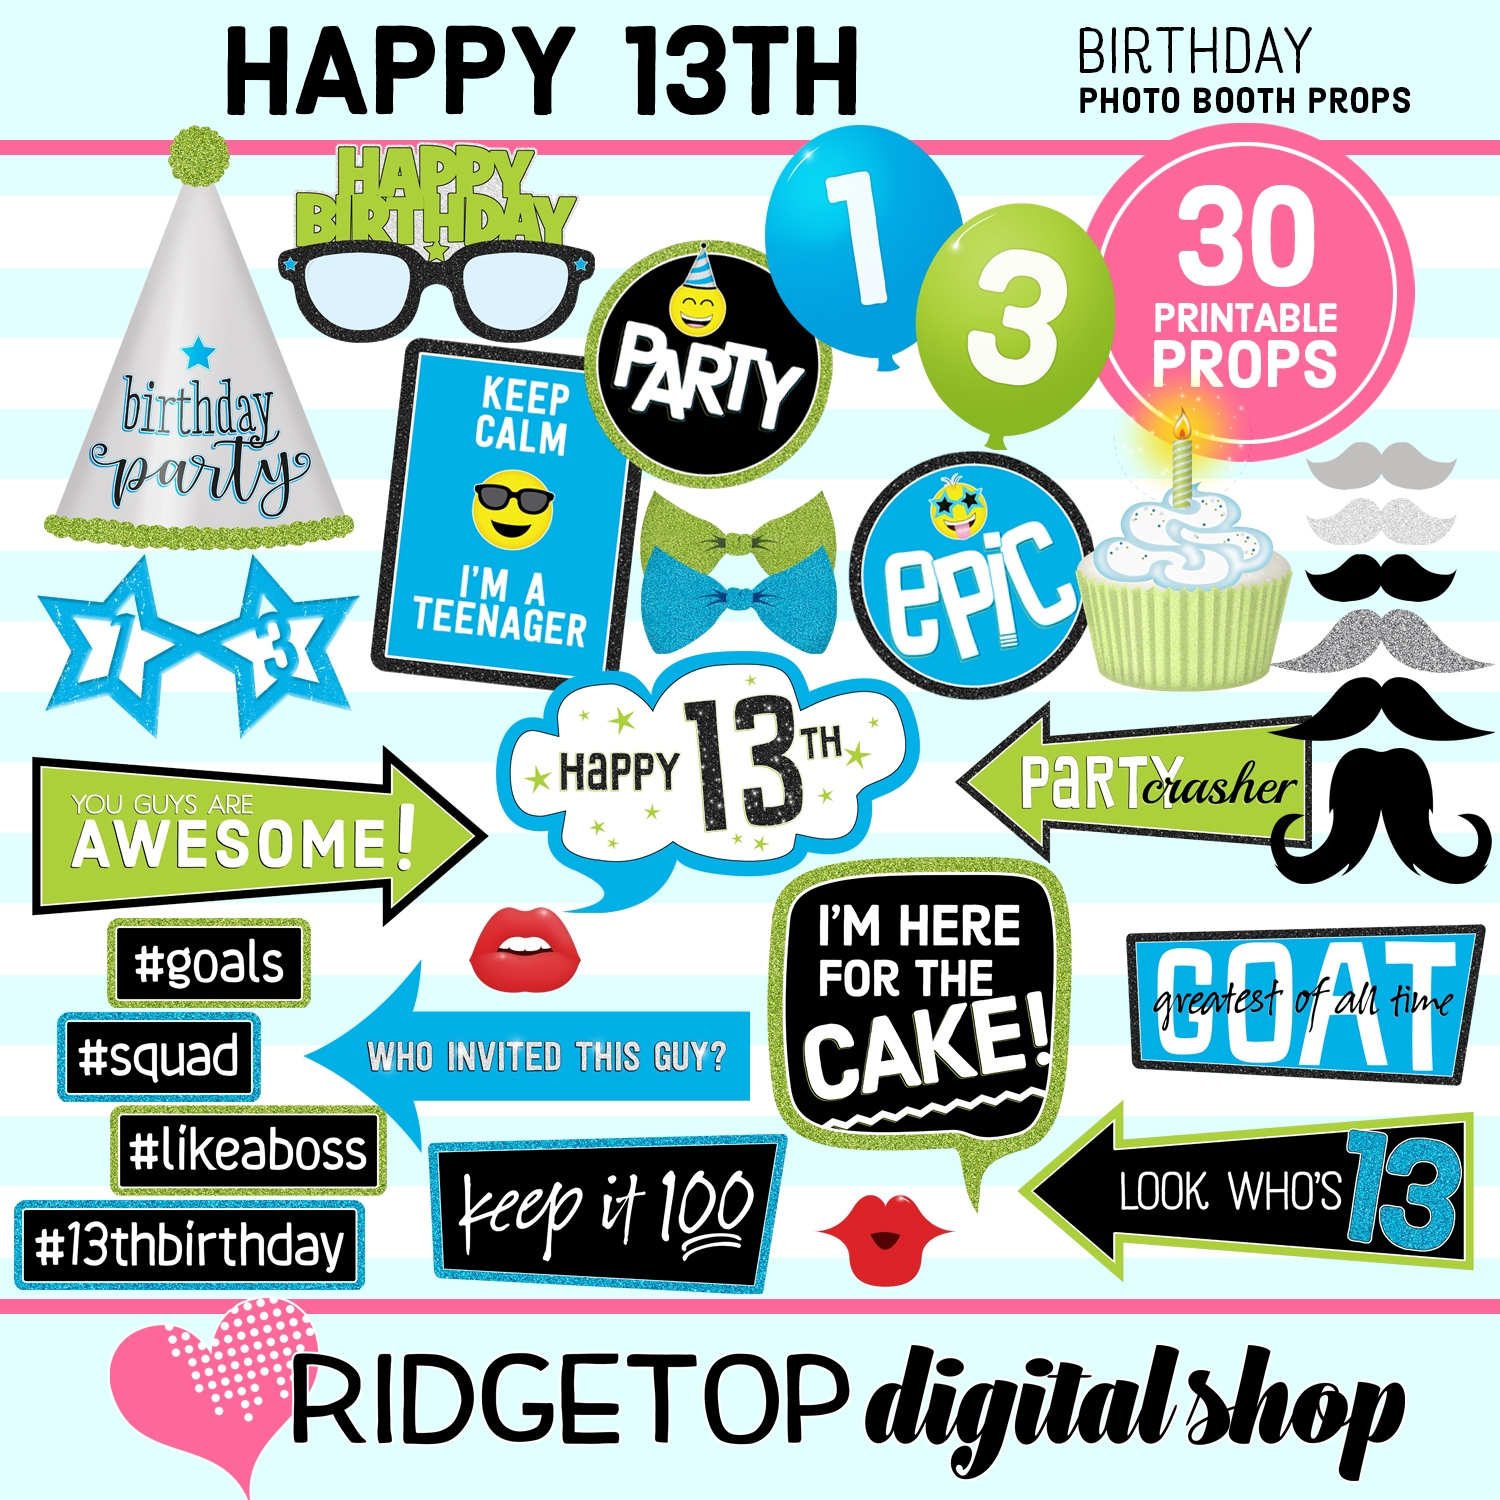 13th Birthday Photo Booth Props Printable Ridgetop Digital Shop - Free Printable 30Th Birthday Photo Booth Props